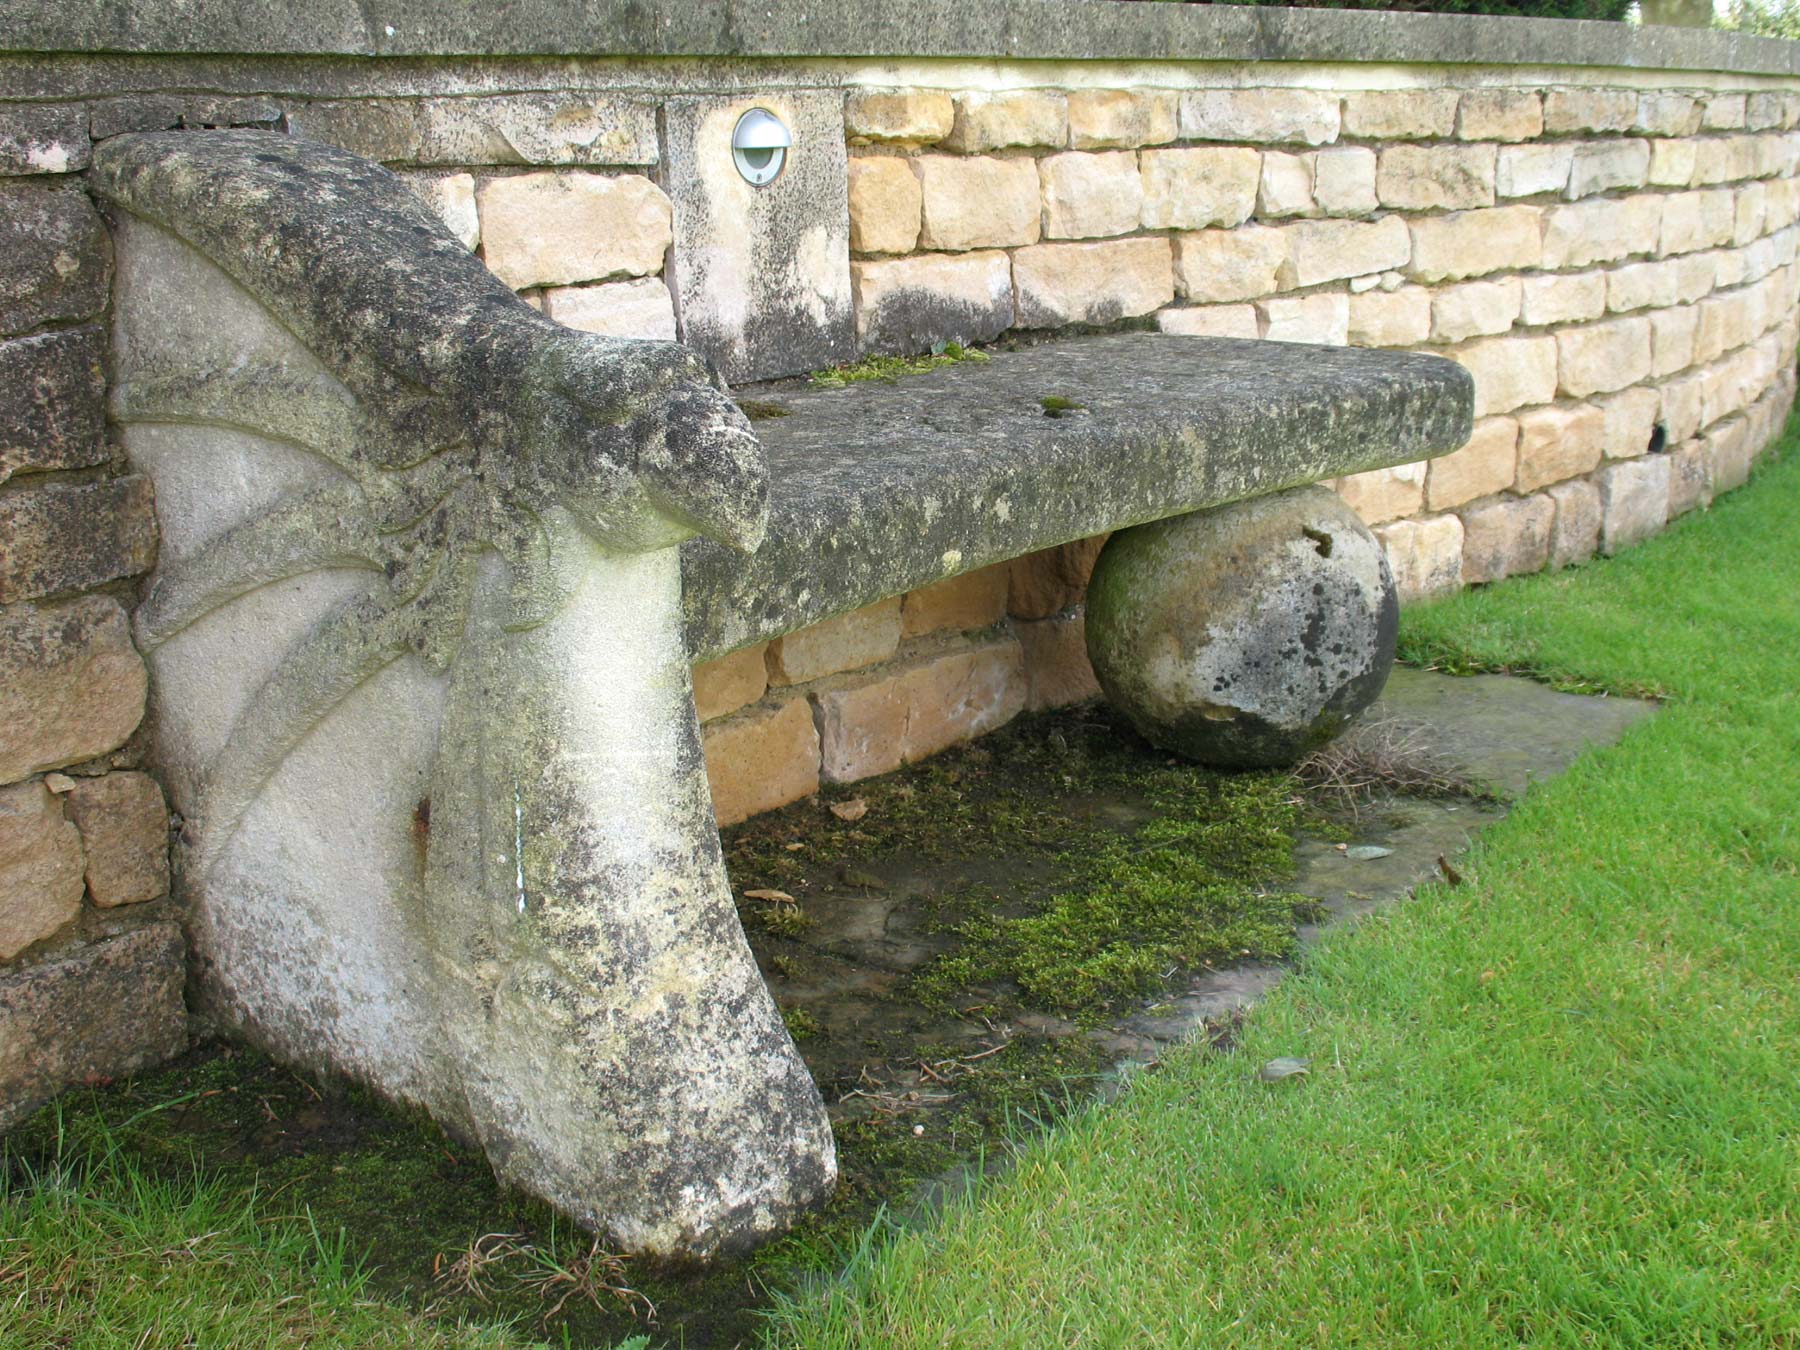 Stylised bath stone dragon wing seats in the garden of a country lodge in Leicestershire designed by Peter Eustance